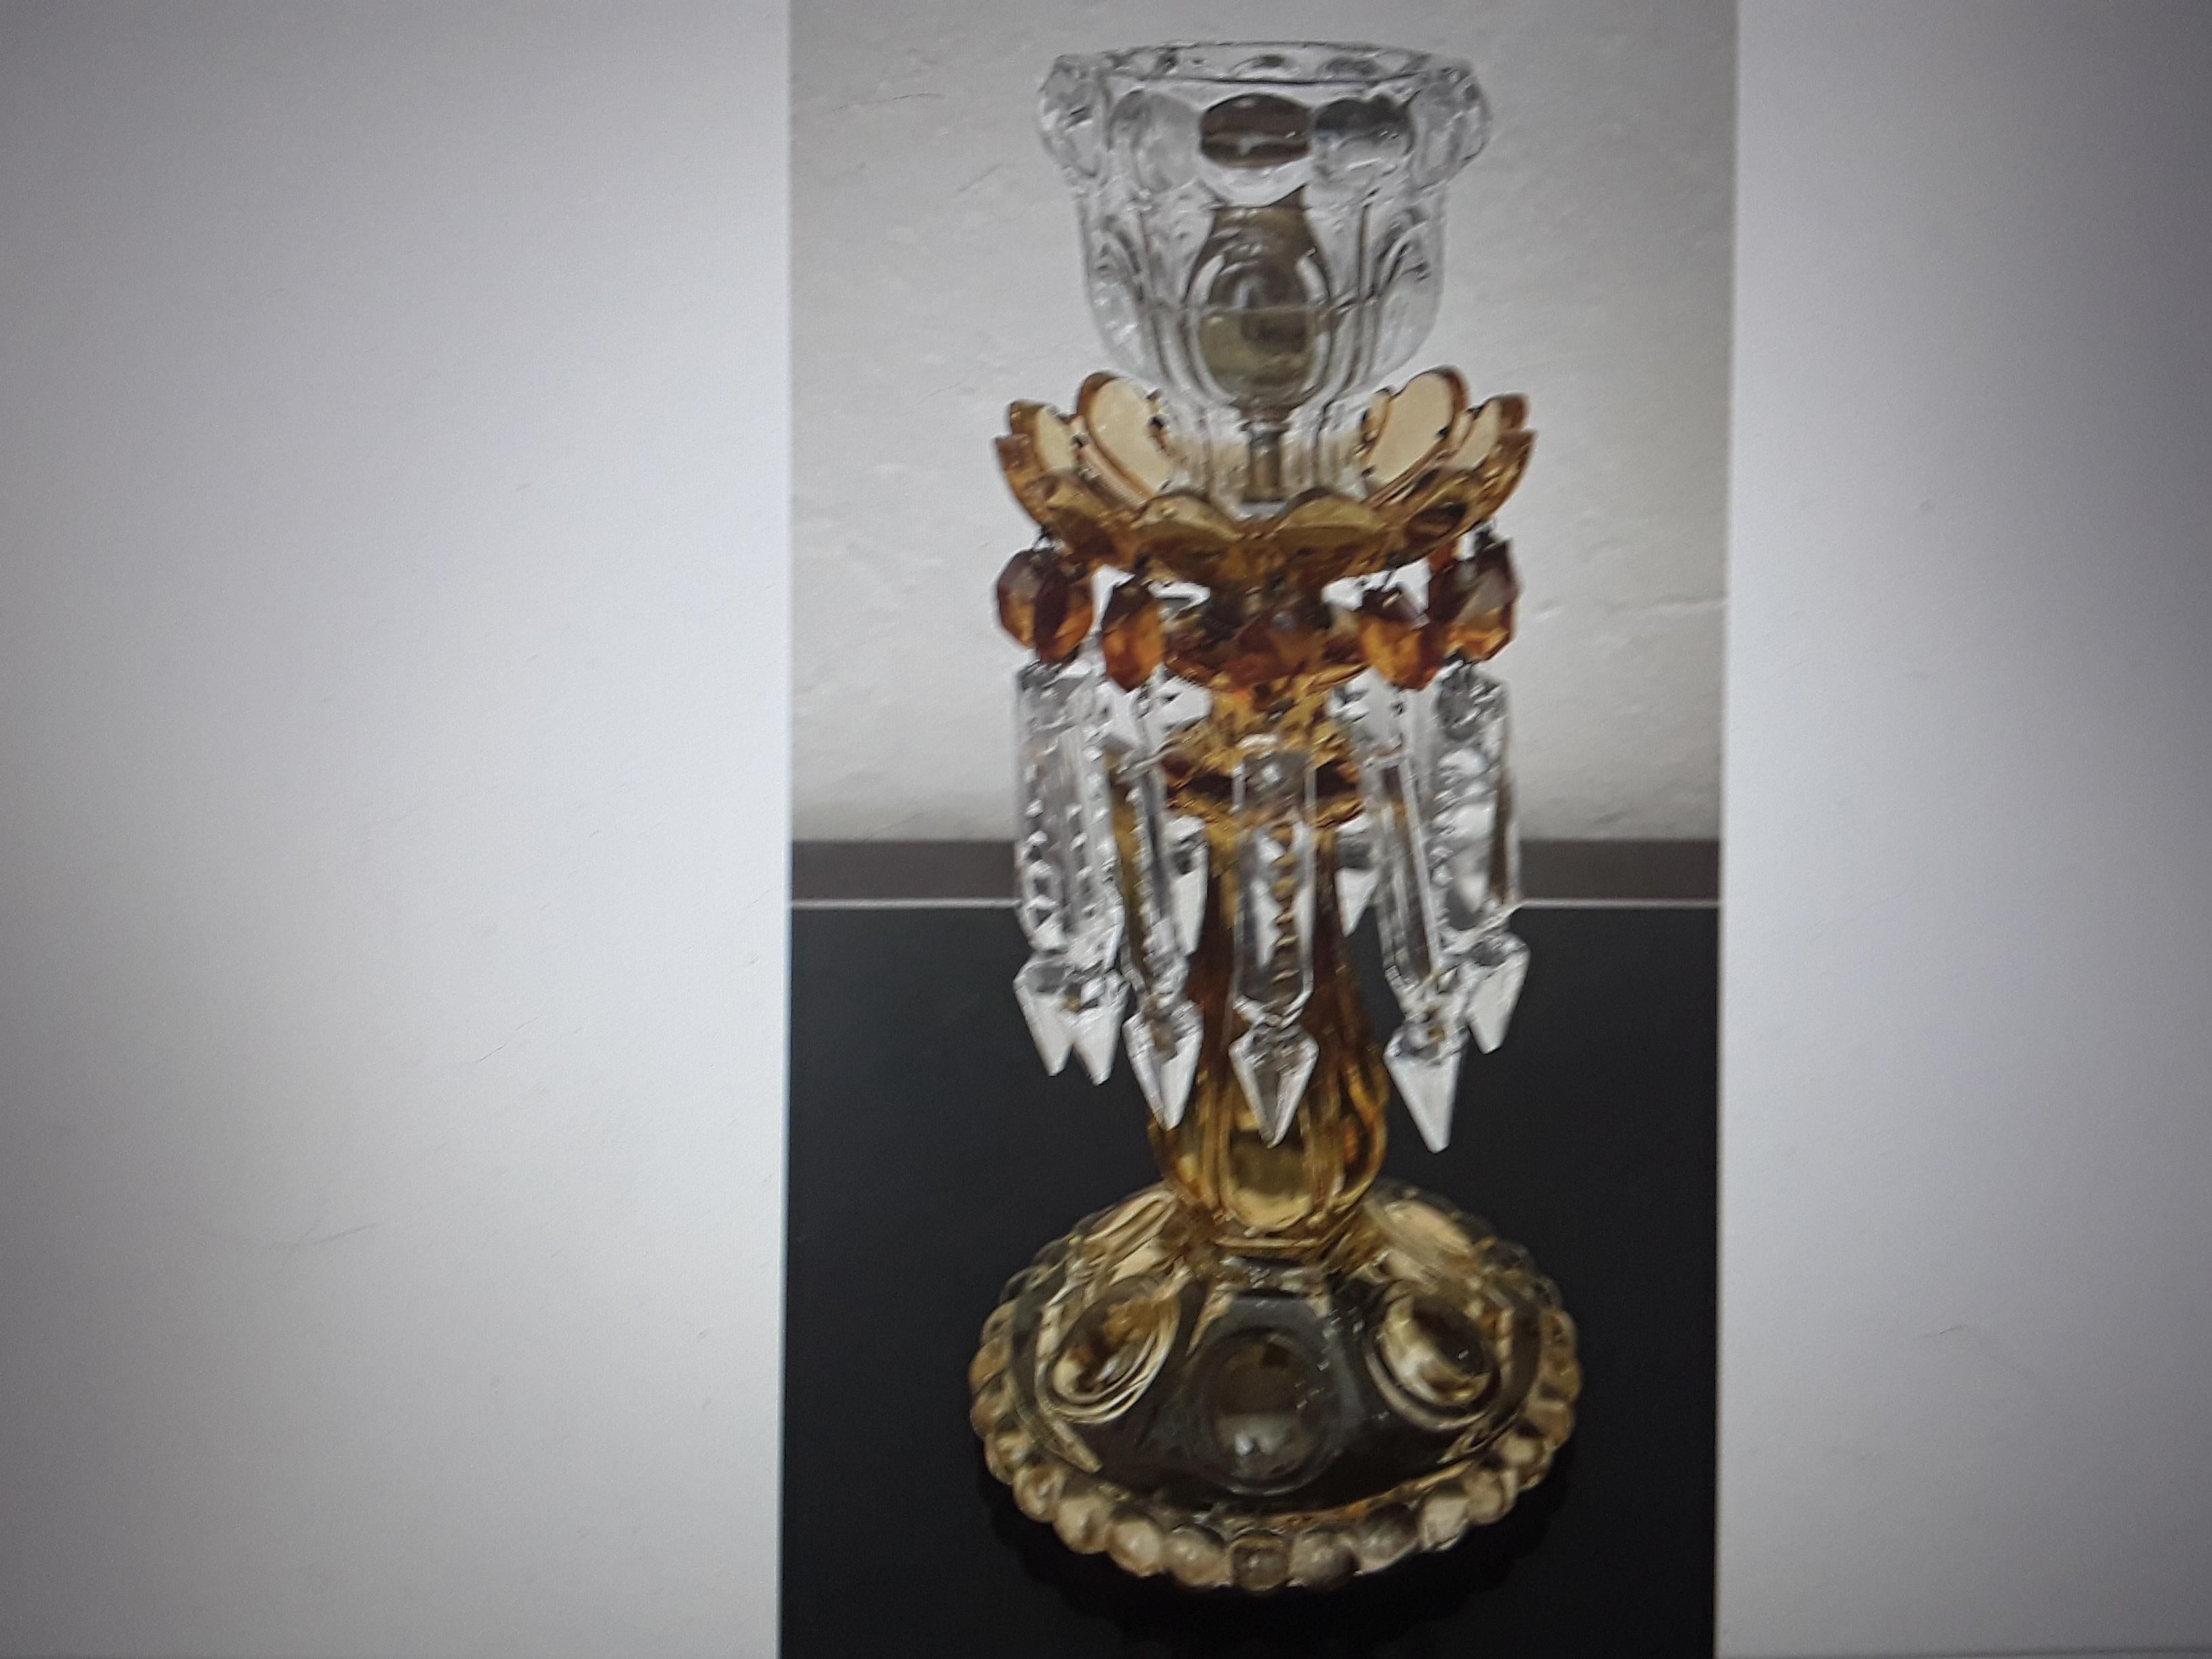 Stunning 1950's Mid Century Crystal Amber Tone Candle Holder by Baccarat France. Nice piece for the collection.